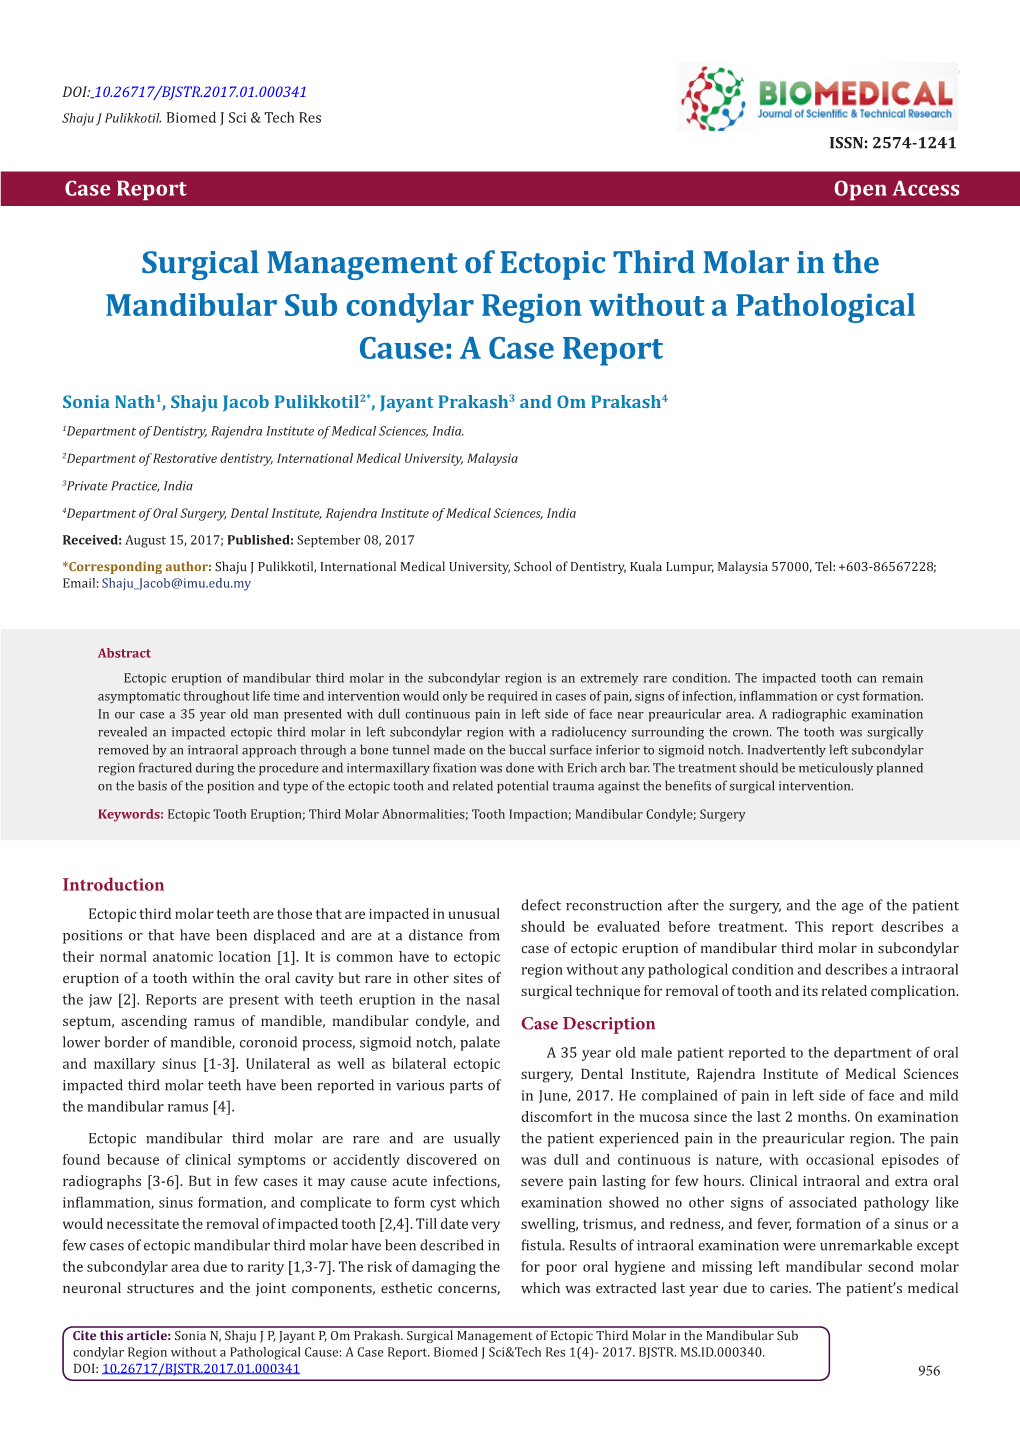 Surgical Management of Ectopic Third Molar in the Mandibular Sub Condylar Region Without a Pathological Cause: a Case Report